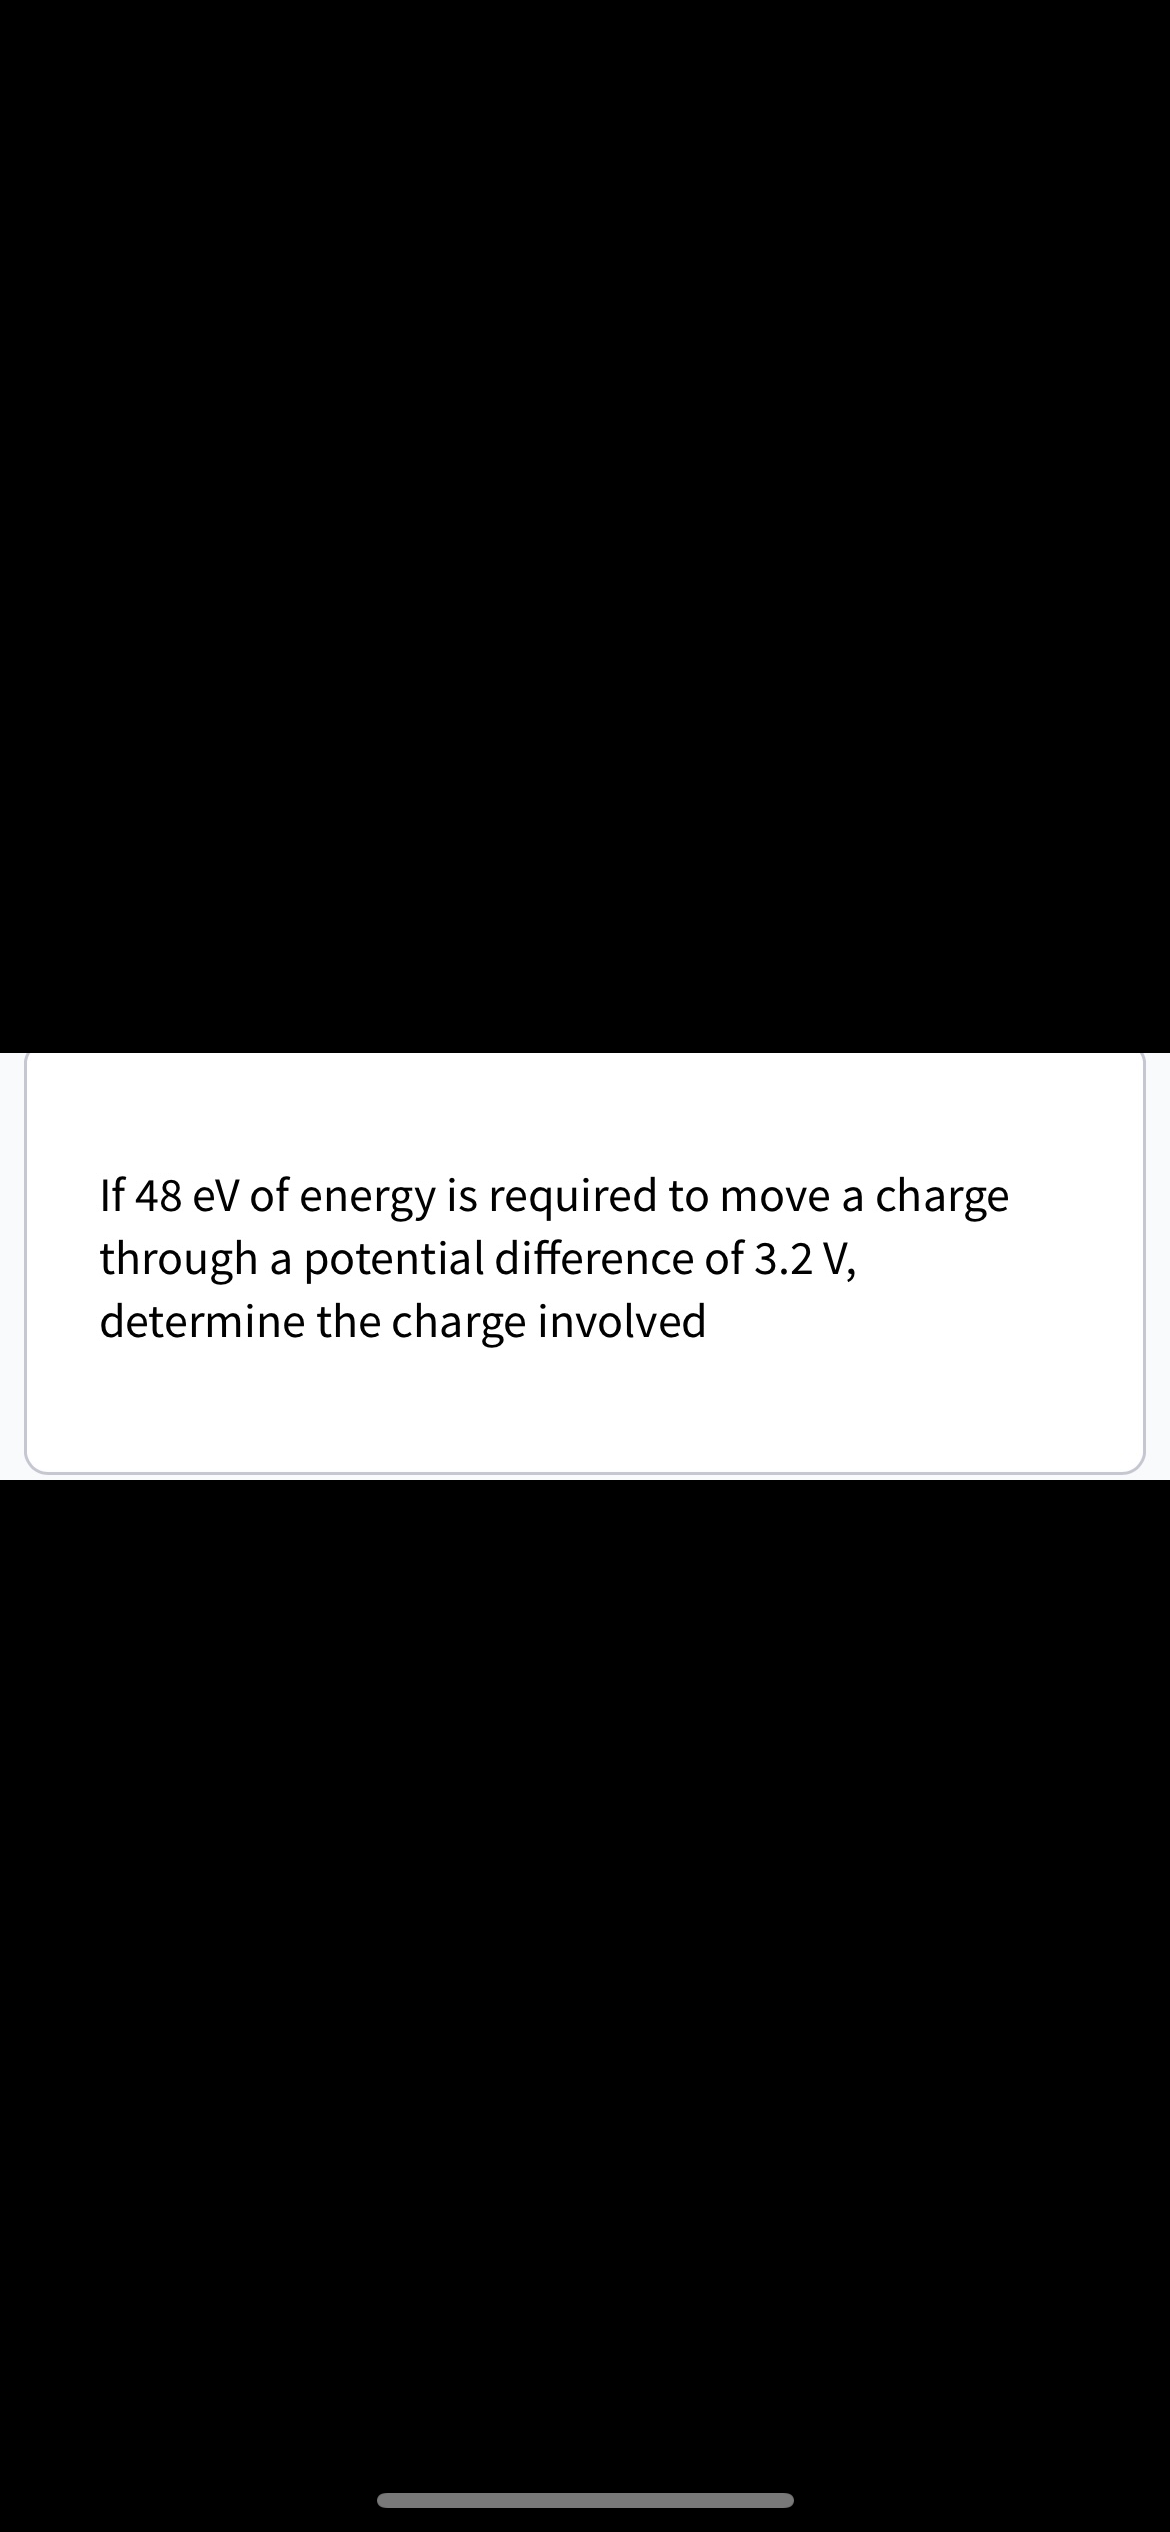 If 48 eV of energy is required to move a charge
through a potential difference of 3.2 V,
determine the charge involved